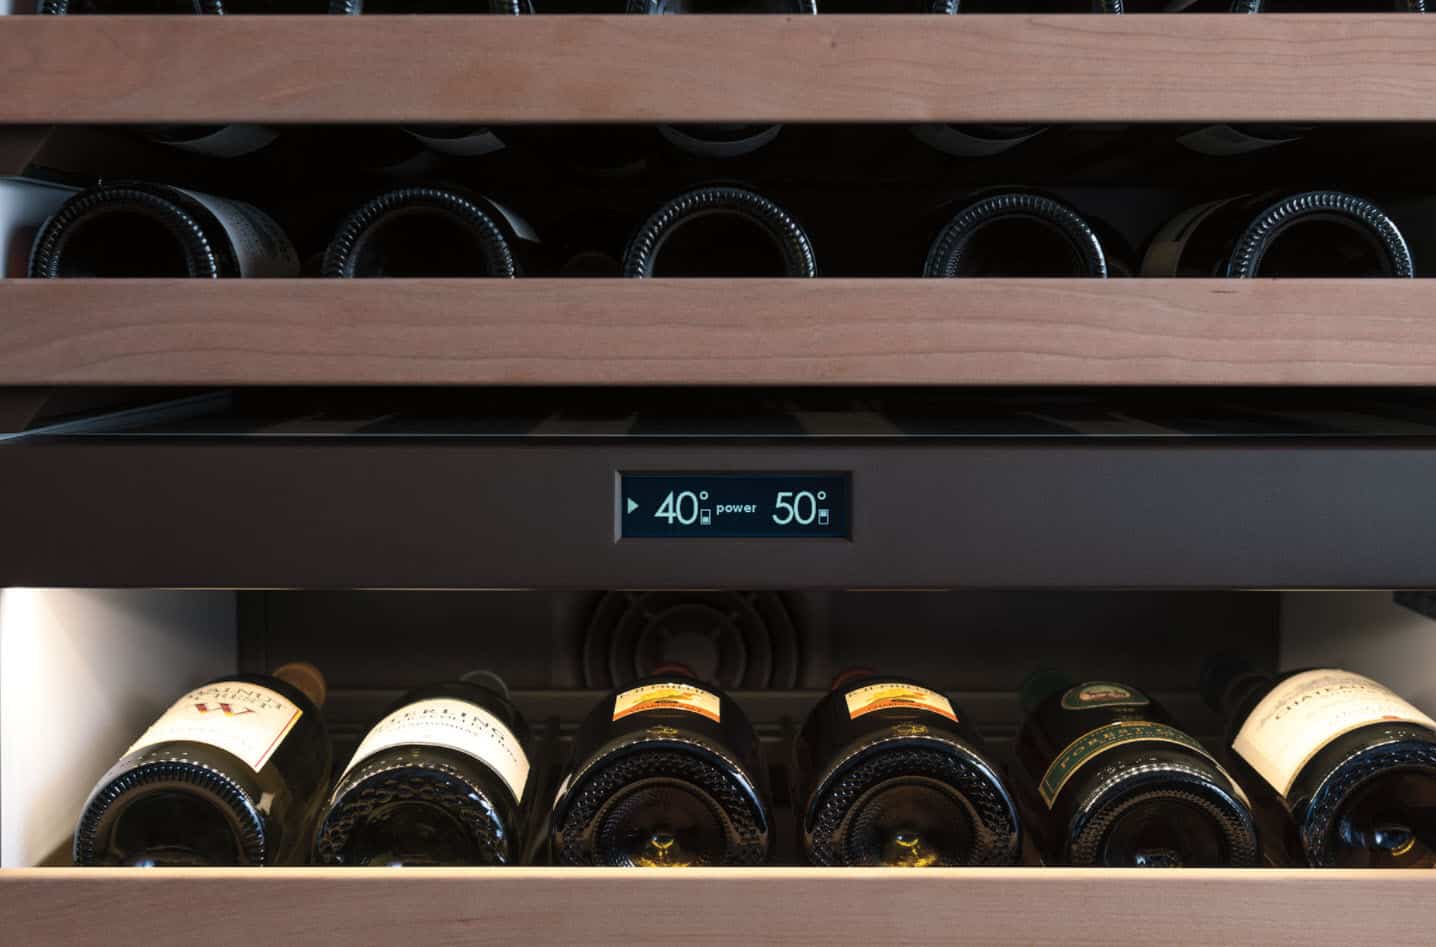 How to use wine cooler